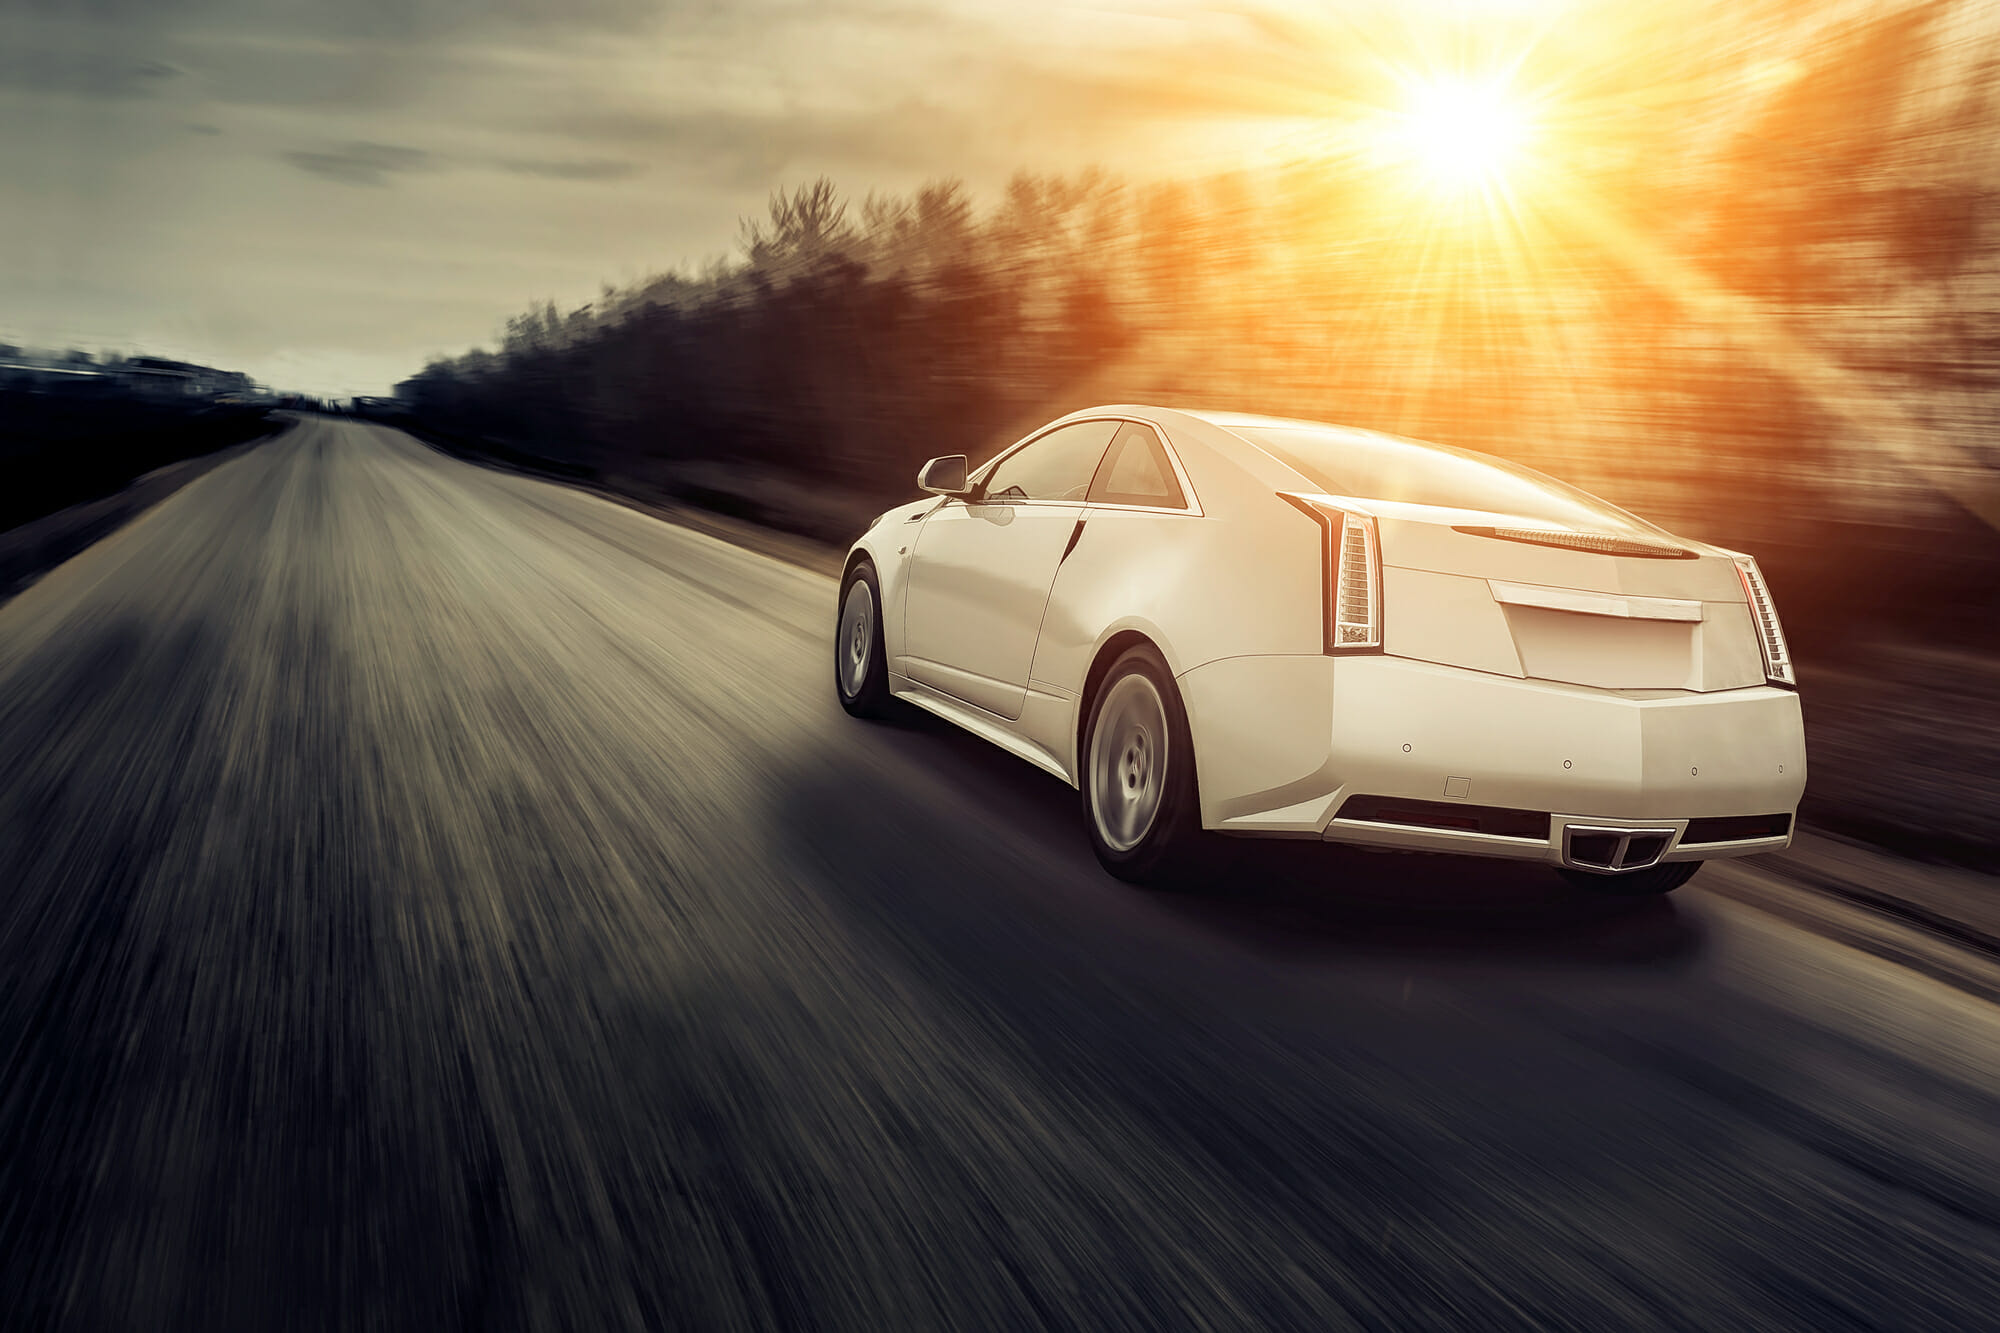 Cadillac car in motion with sun in background